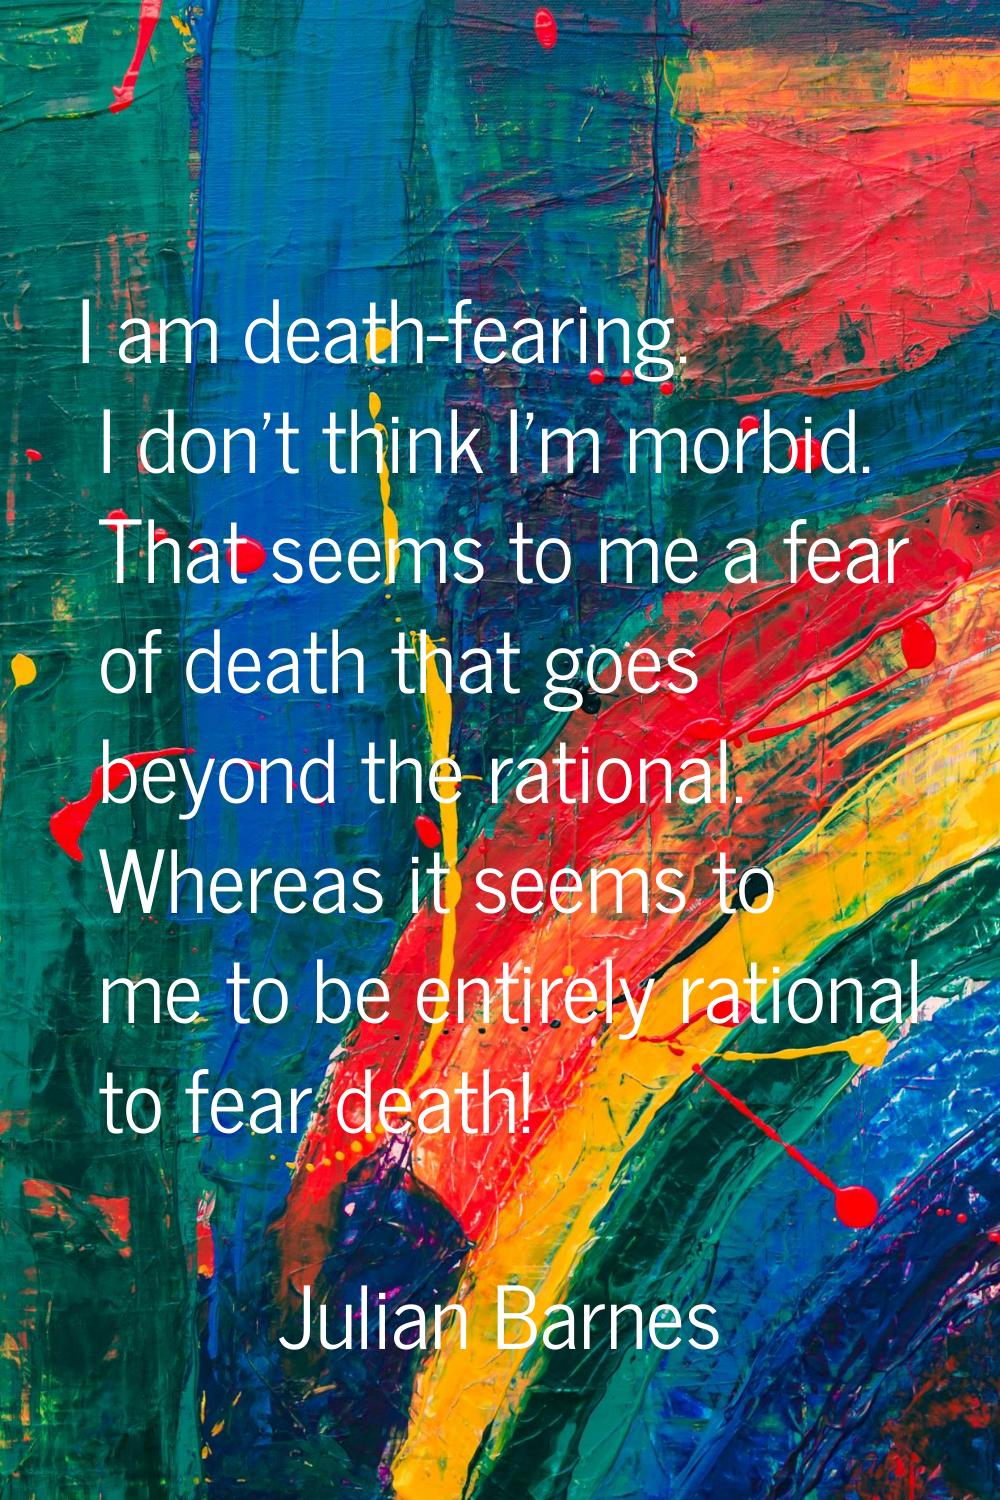 I am death-fearing. I don't think I'm morbid. That seems to me a fear of death that goes beyond the